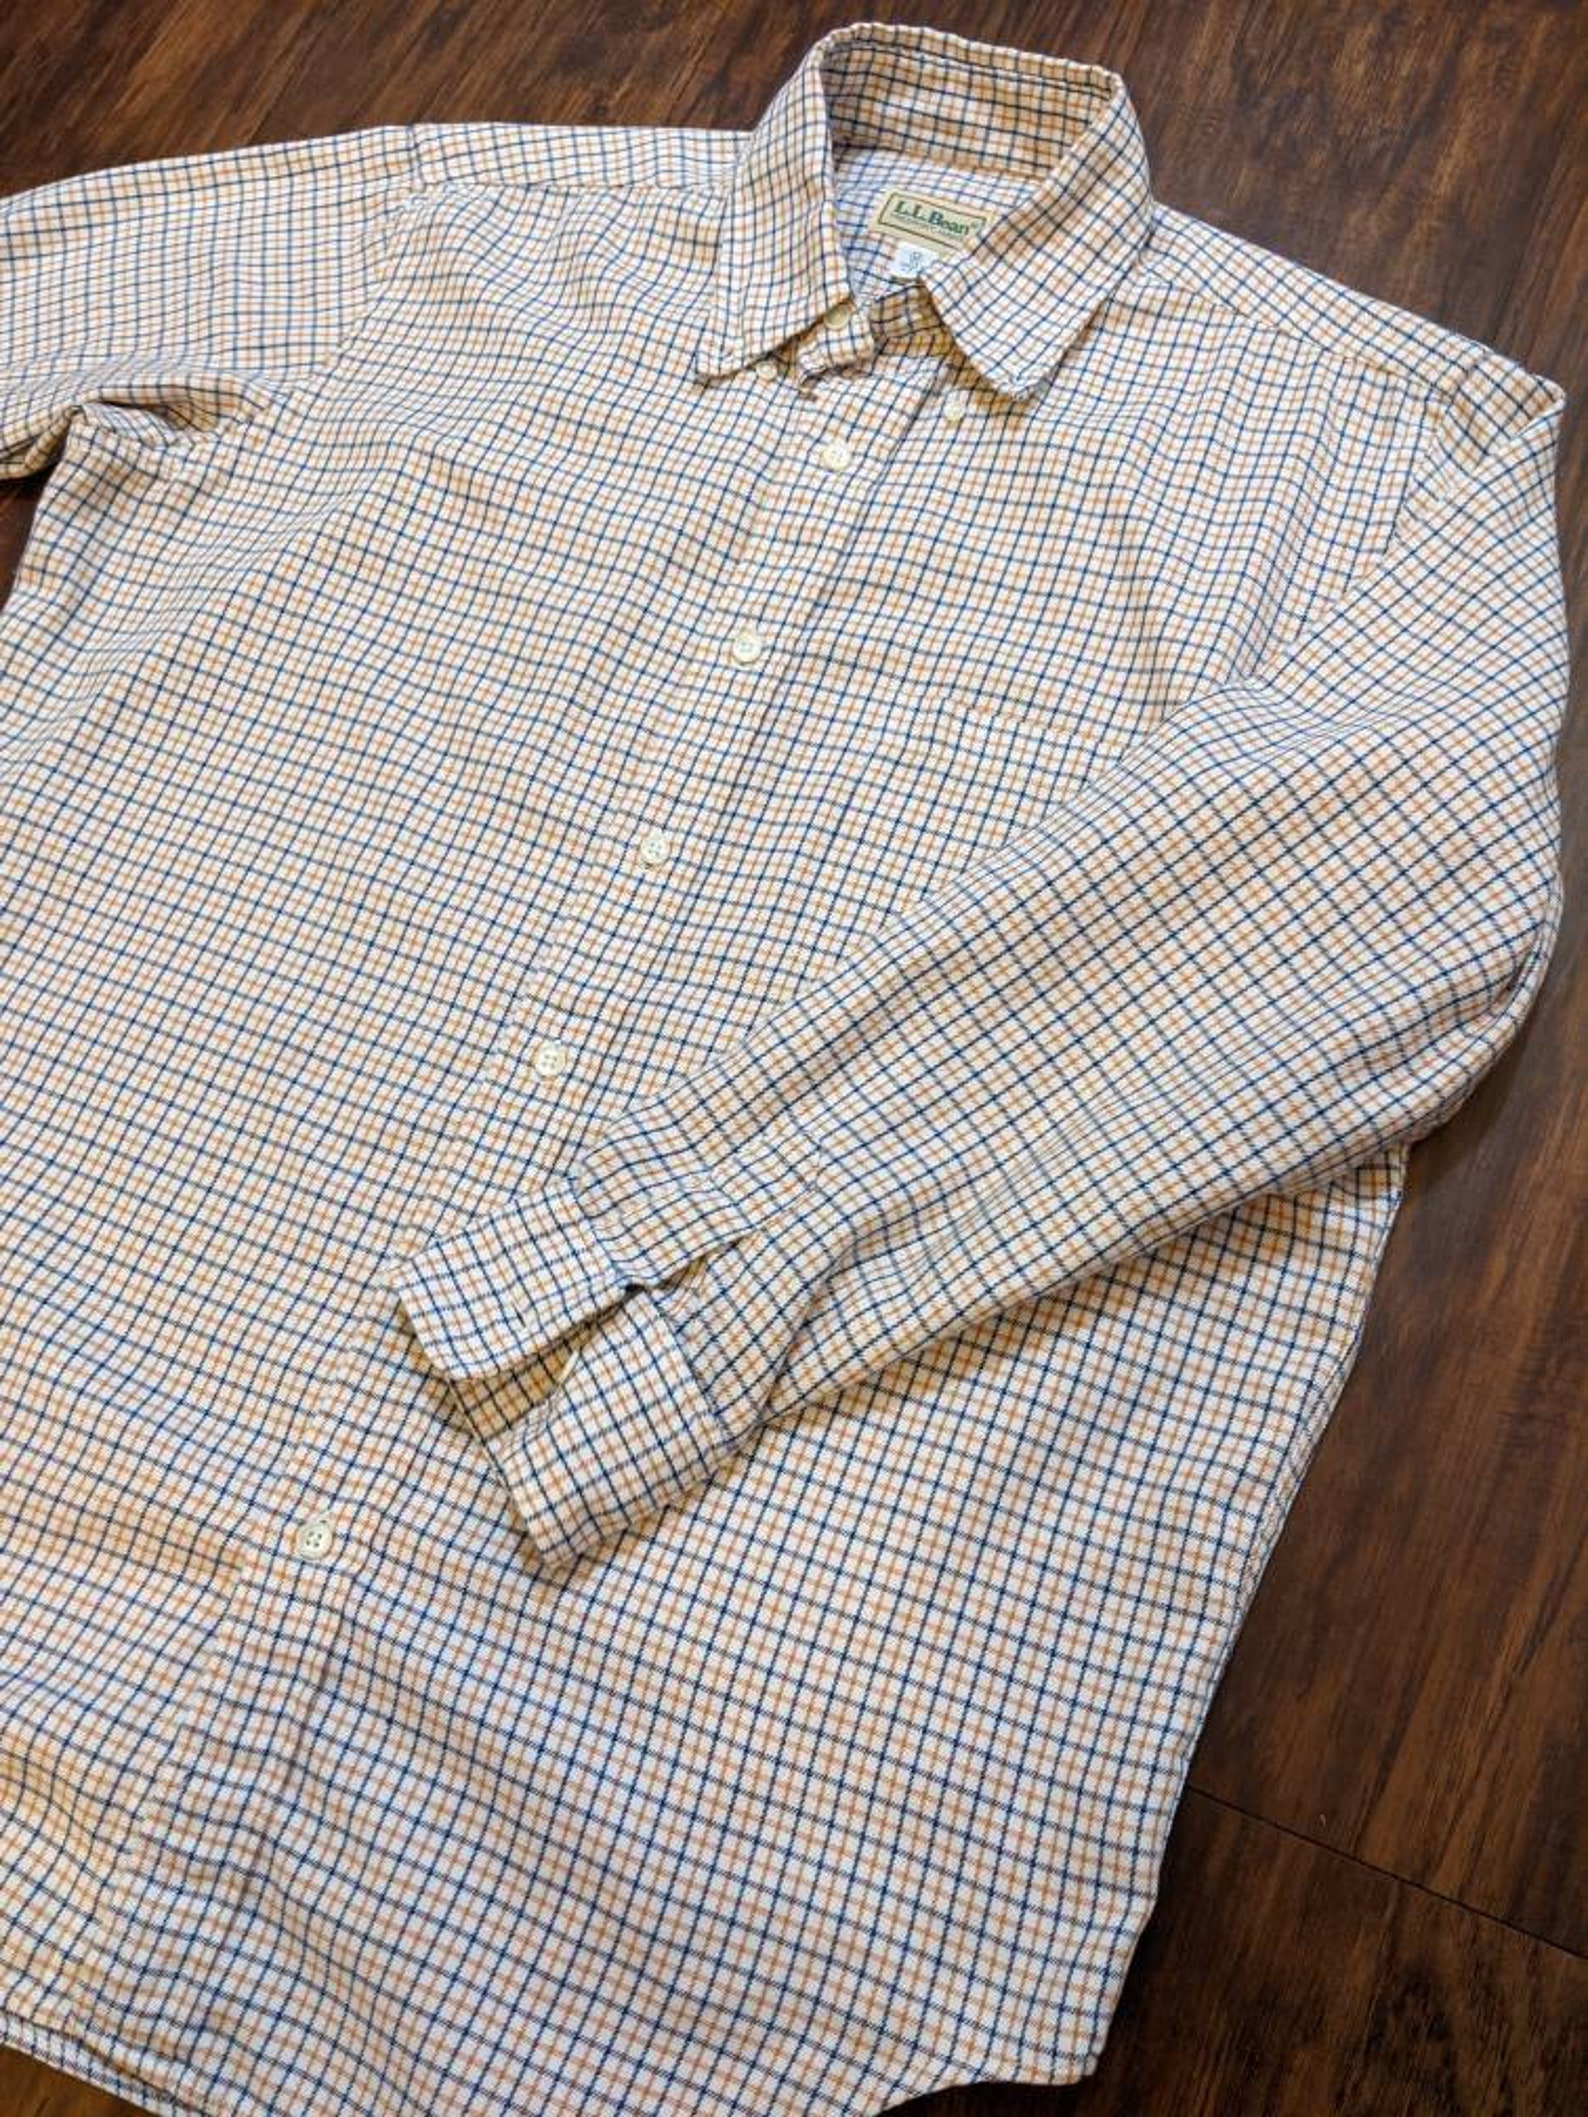 LL Bean 80s/90s Vintage Button Up Made in USA | Etsy